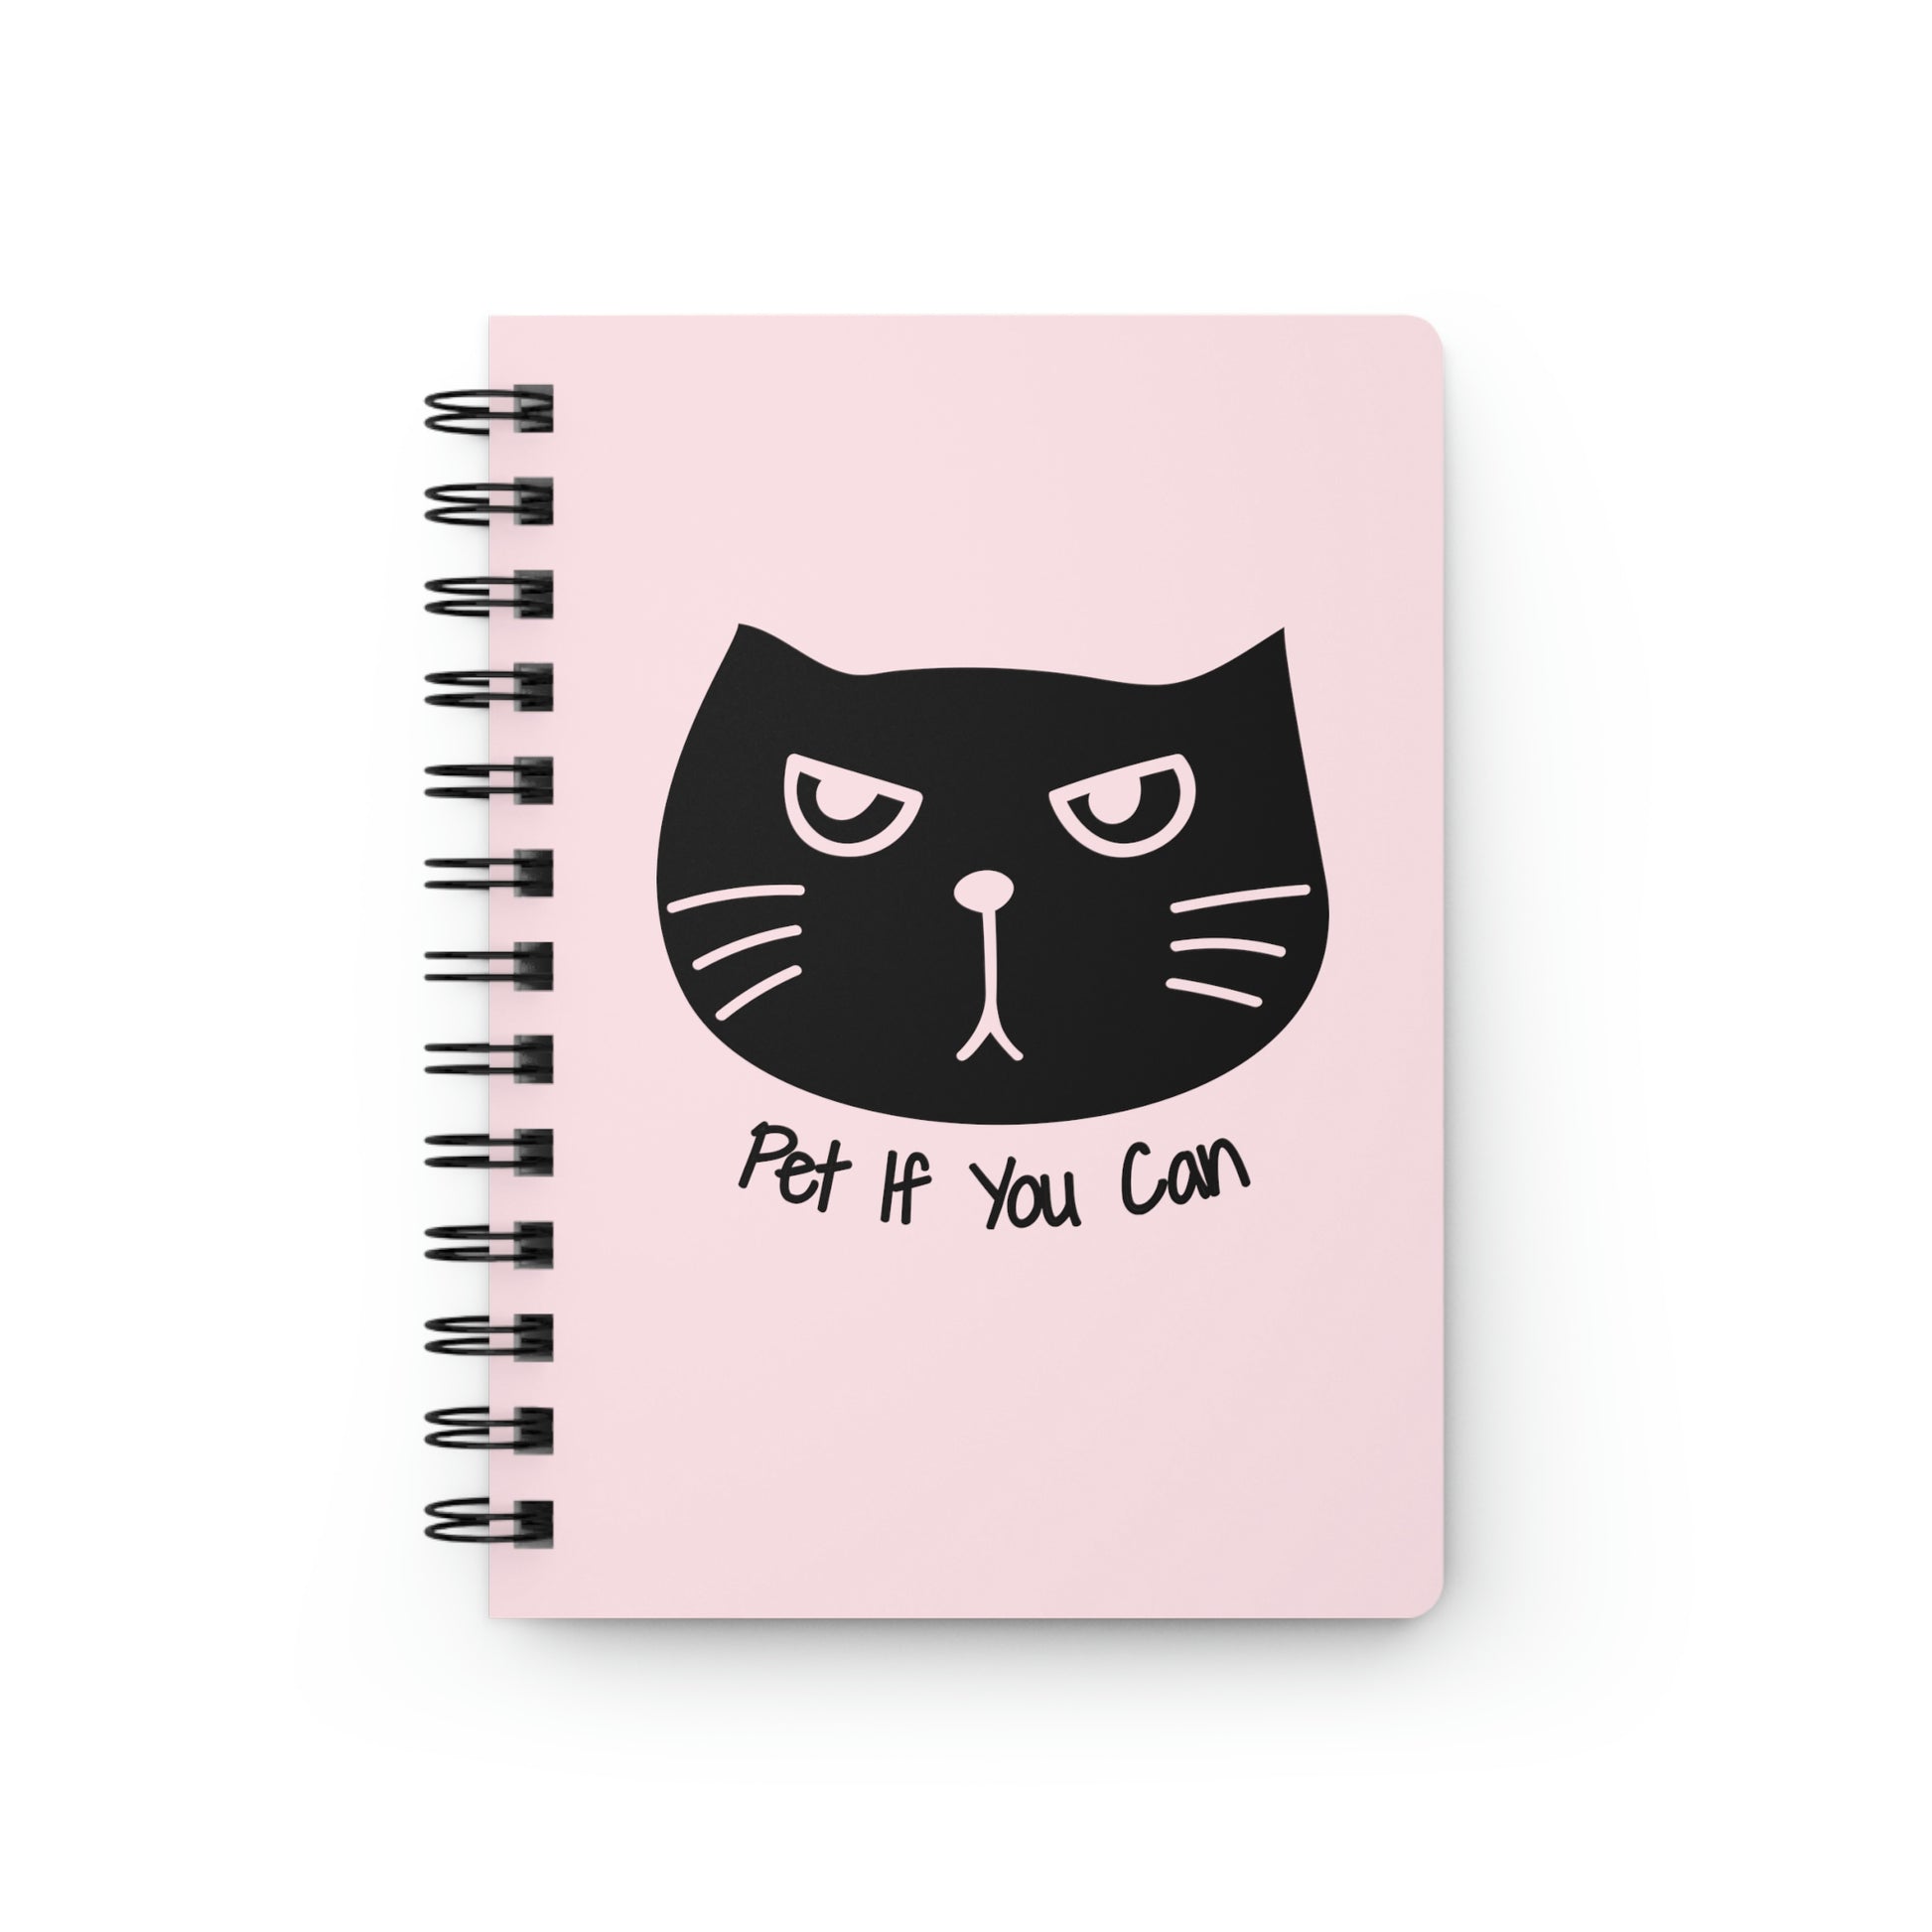 Funny black cat Spiral Bound Journal, pink notebook, cute notebook, kawaii journal, back to school, cat lover gift, pet if you can journal